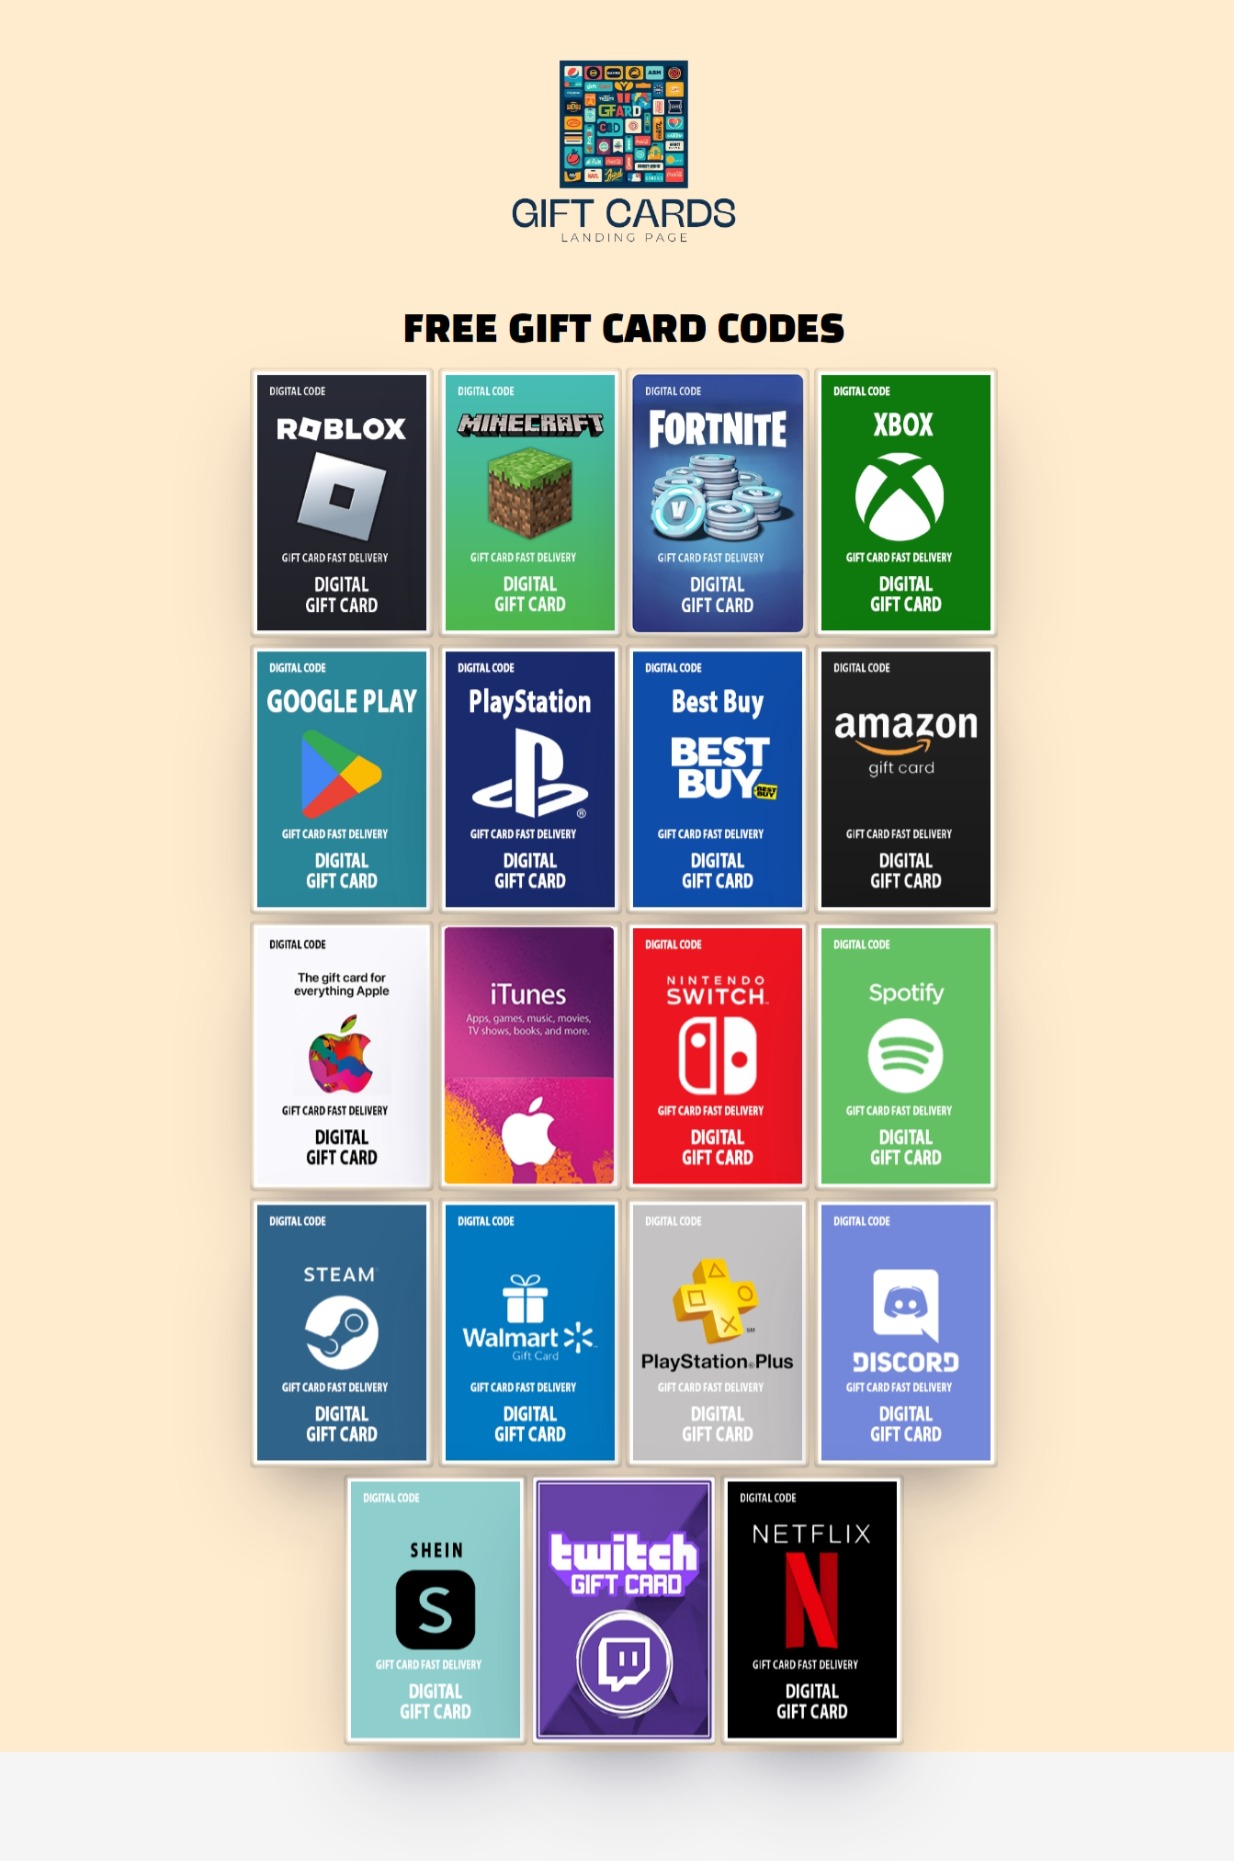 I will create a custom landing page for gift cards